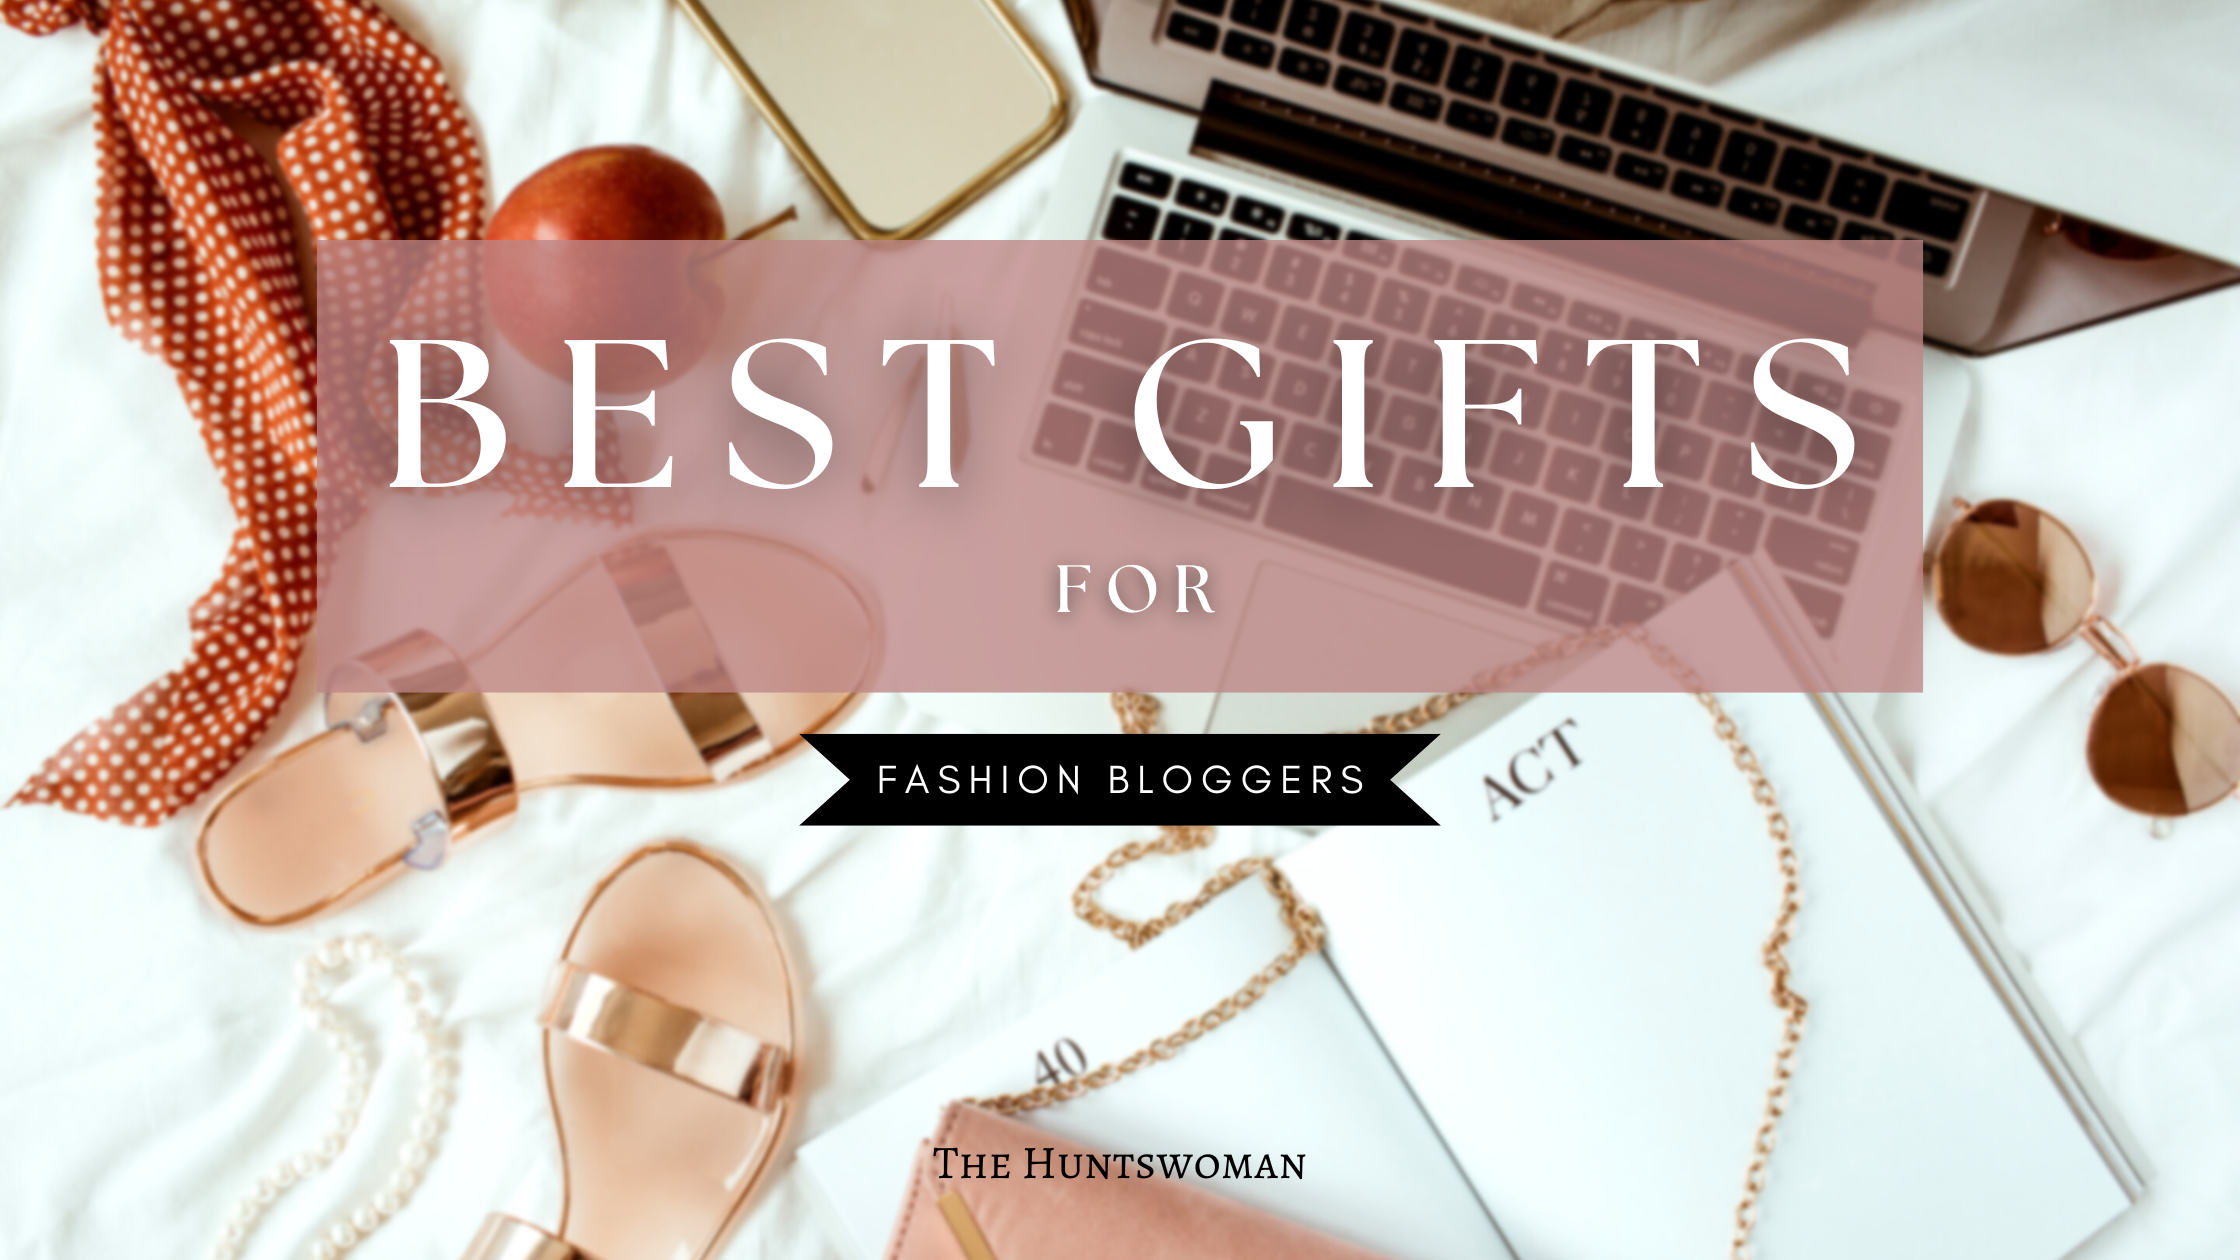 https://thehuntswoman.com/wp-content/uploads/2022/10/best-gifts-for-fashion-bloggers-my-personal-gift-guide-1.png